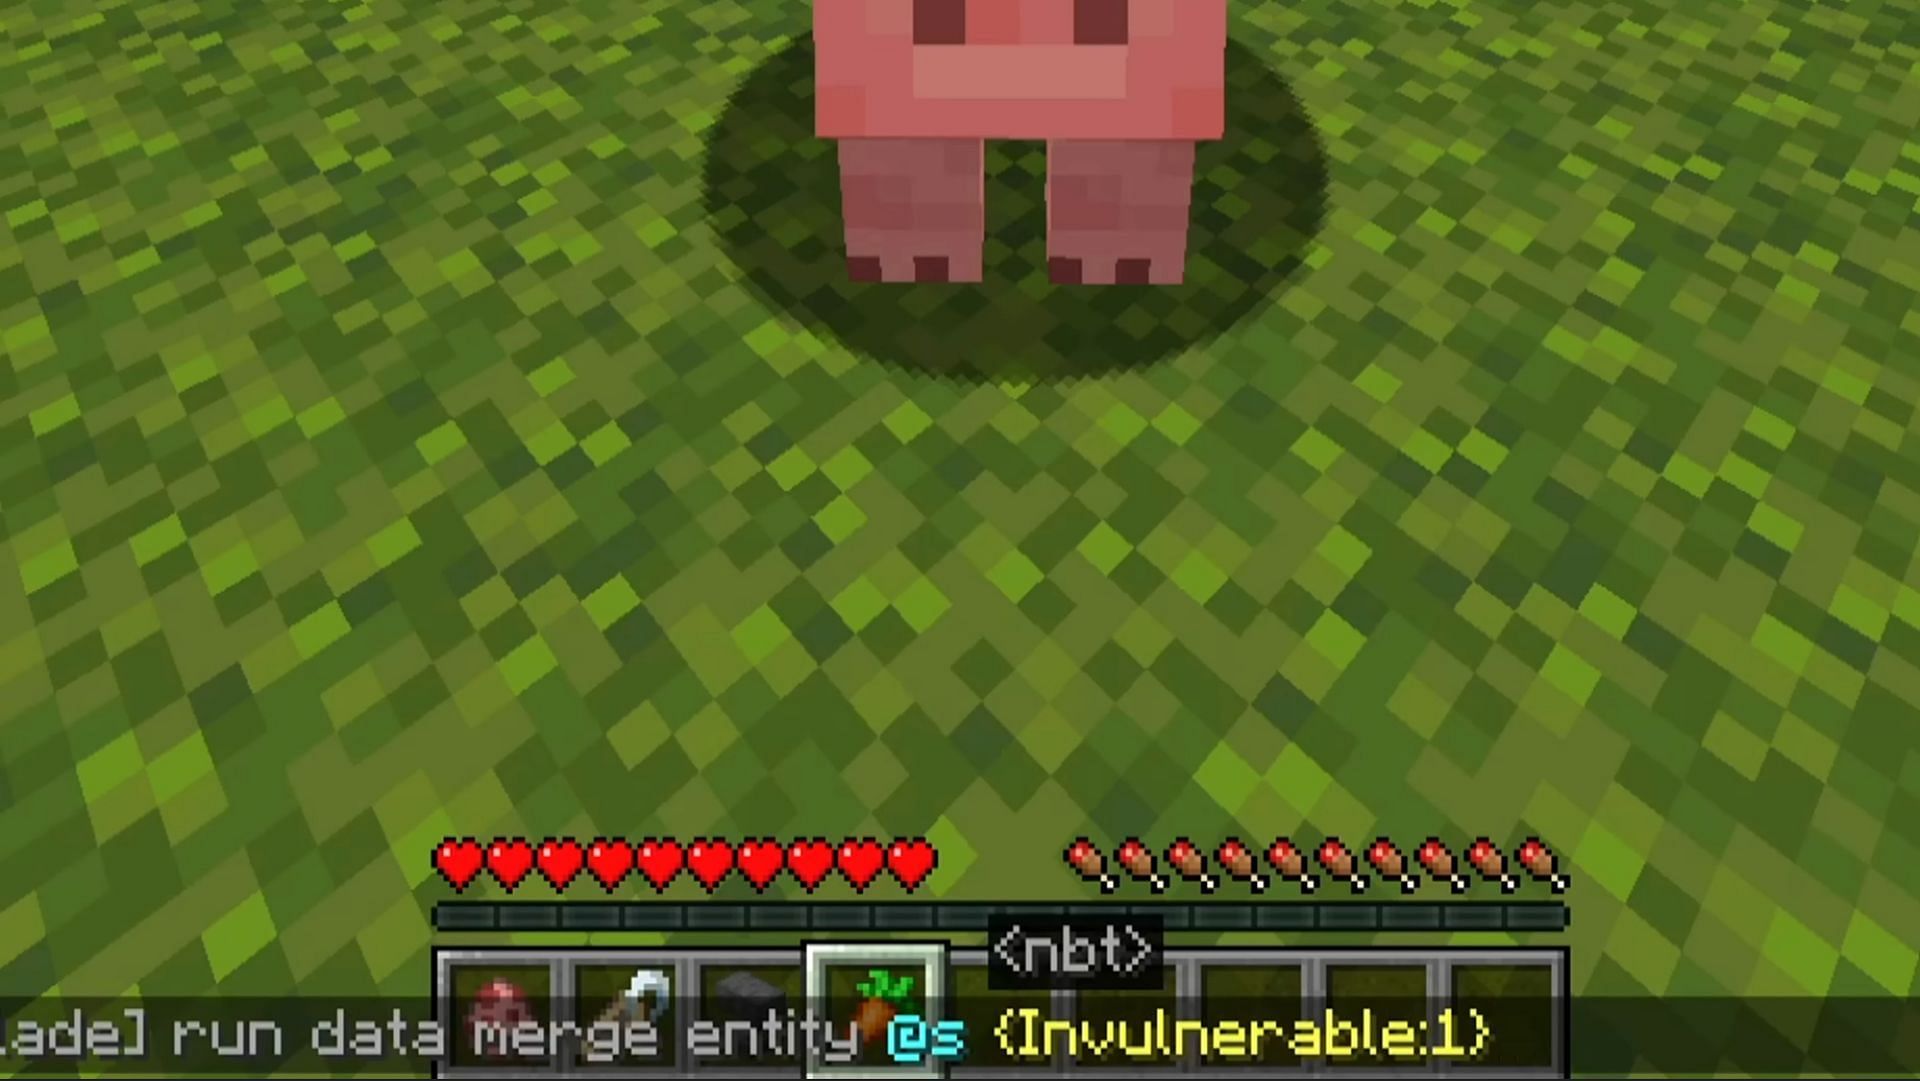 The YouTuber gives the pig invulnerability to the pig mob (Image via Phoenix SC YouTube)